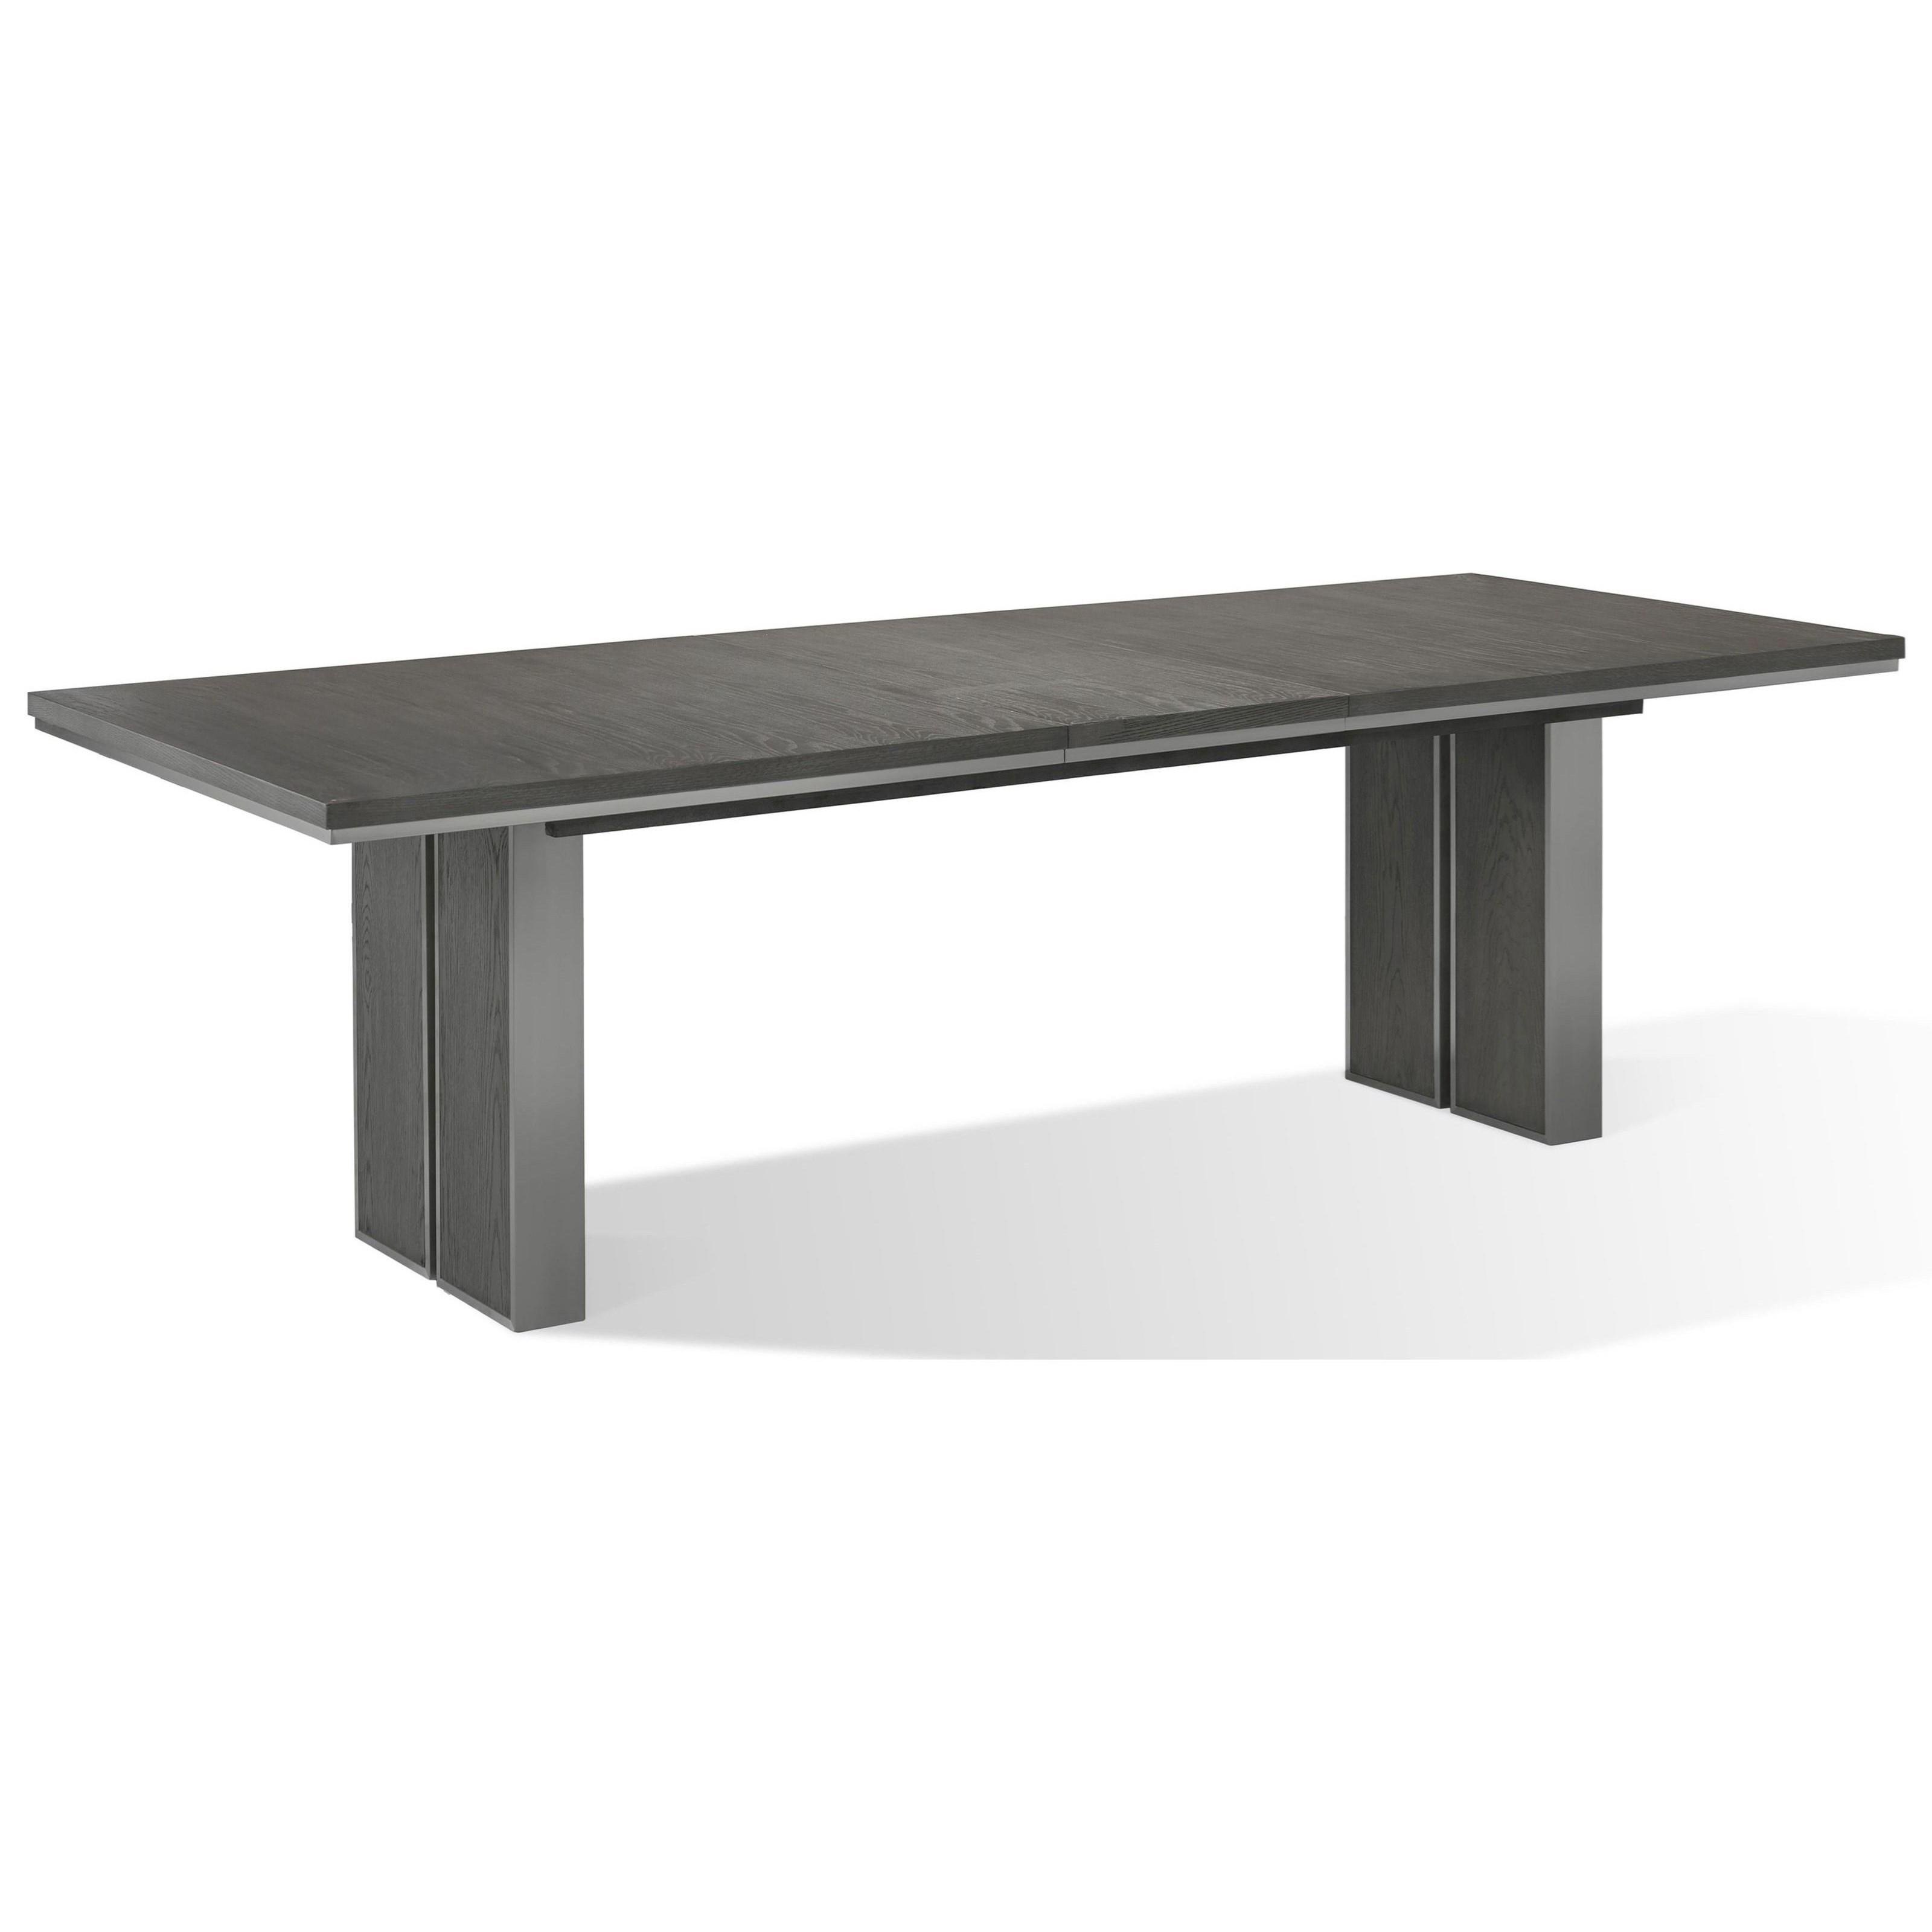 

    
Thunder Grey Finish Modern Extension Dining Table Set 7Pcs PLATA by Modus Furniture
